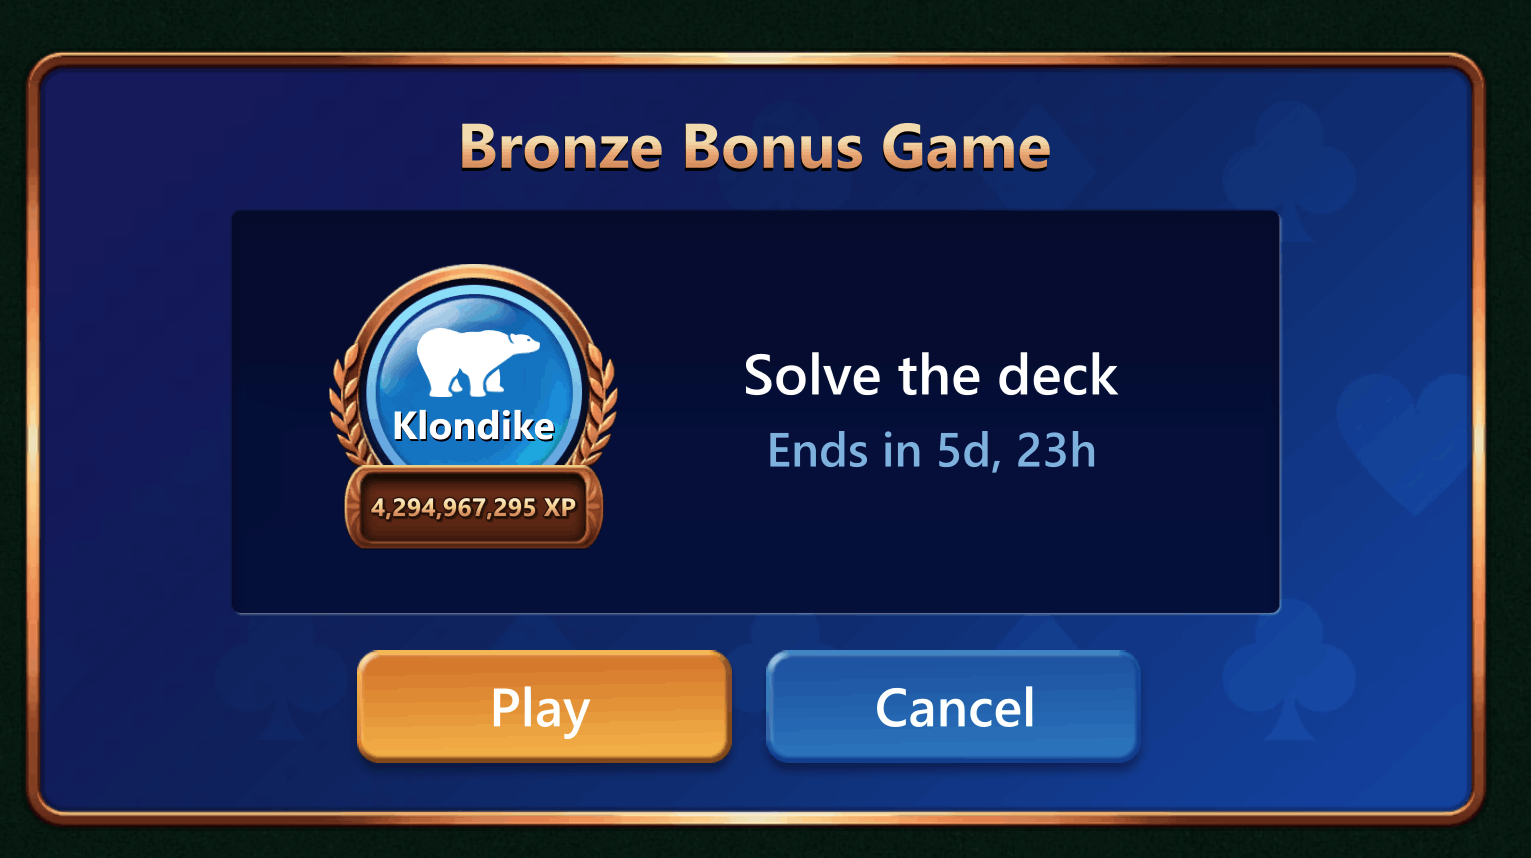 Solvitaire the Solitaire solver playing Klondike 